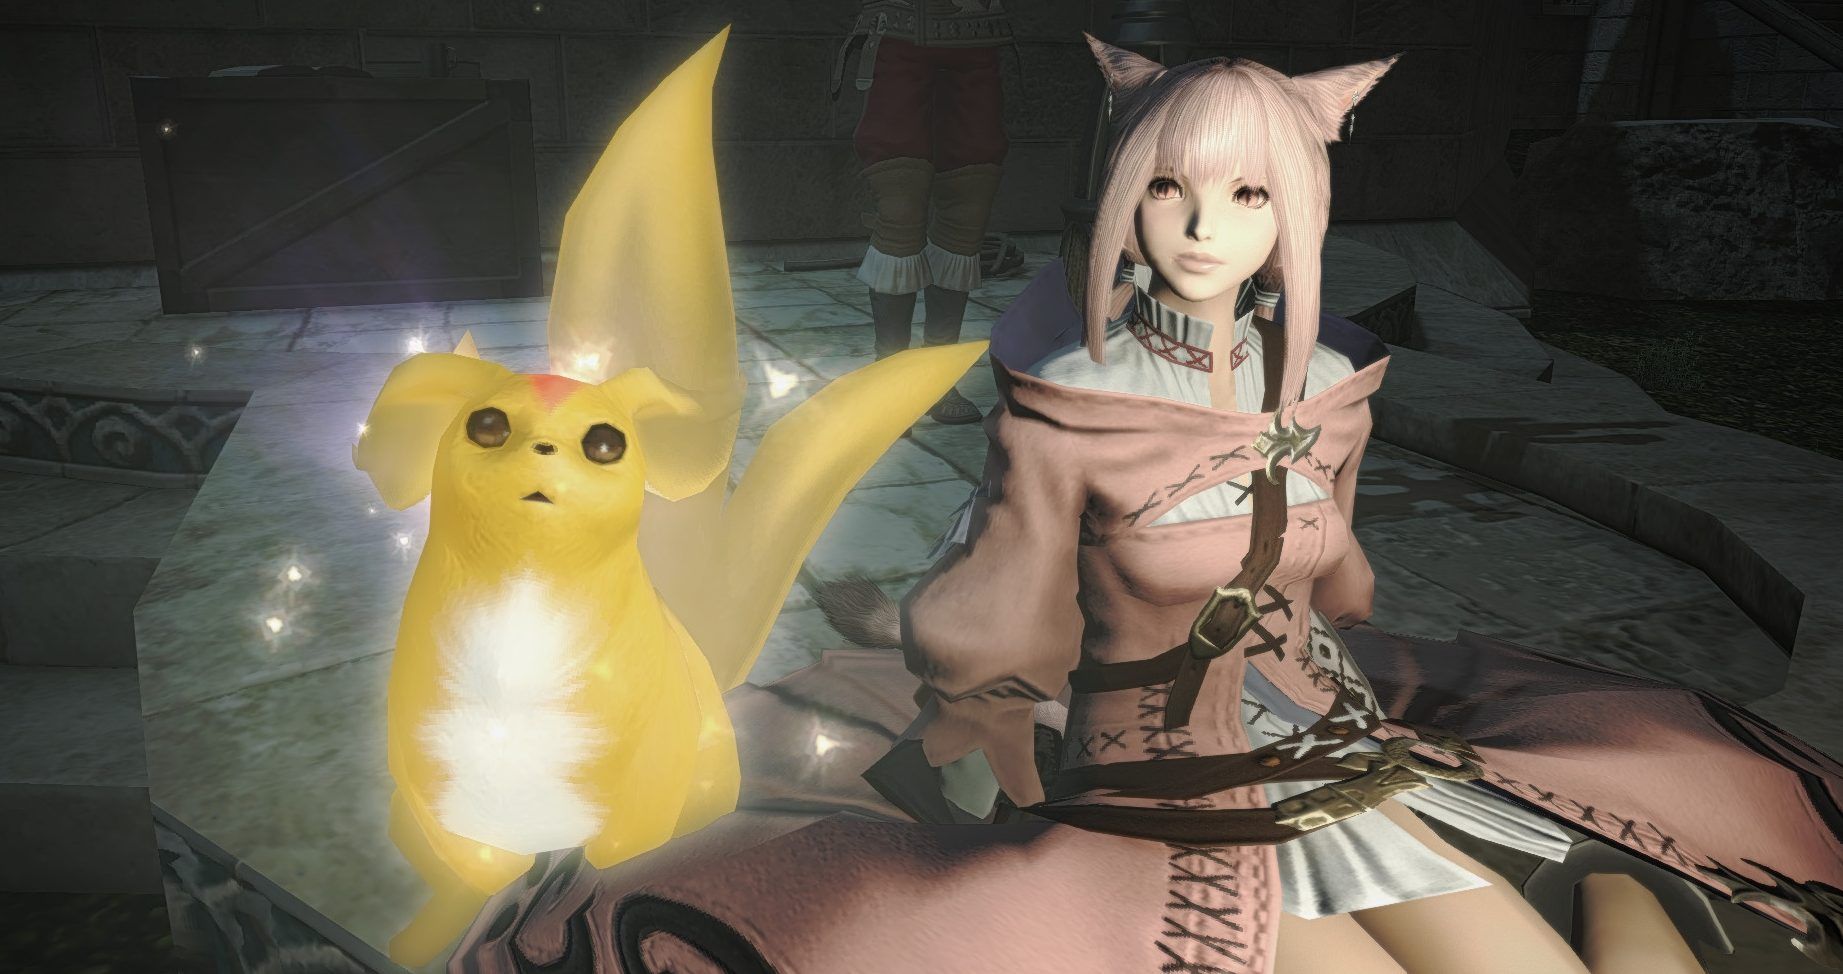 Final Fantasy XIV guide: List of playable races